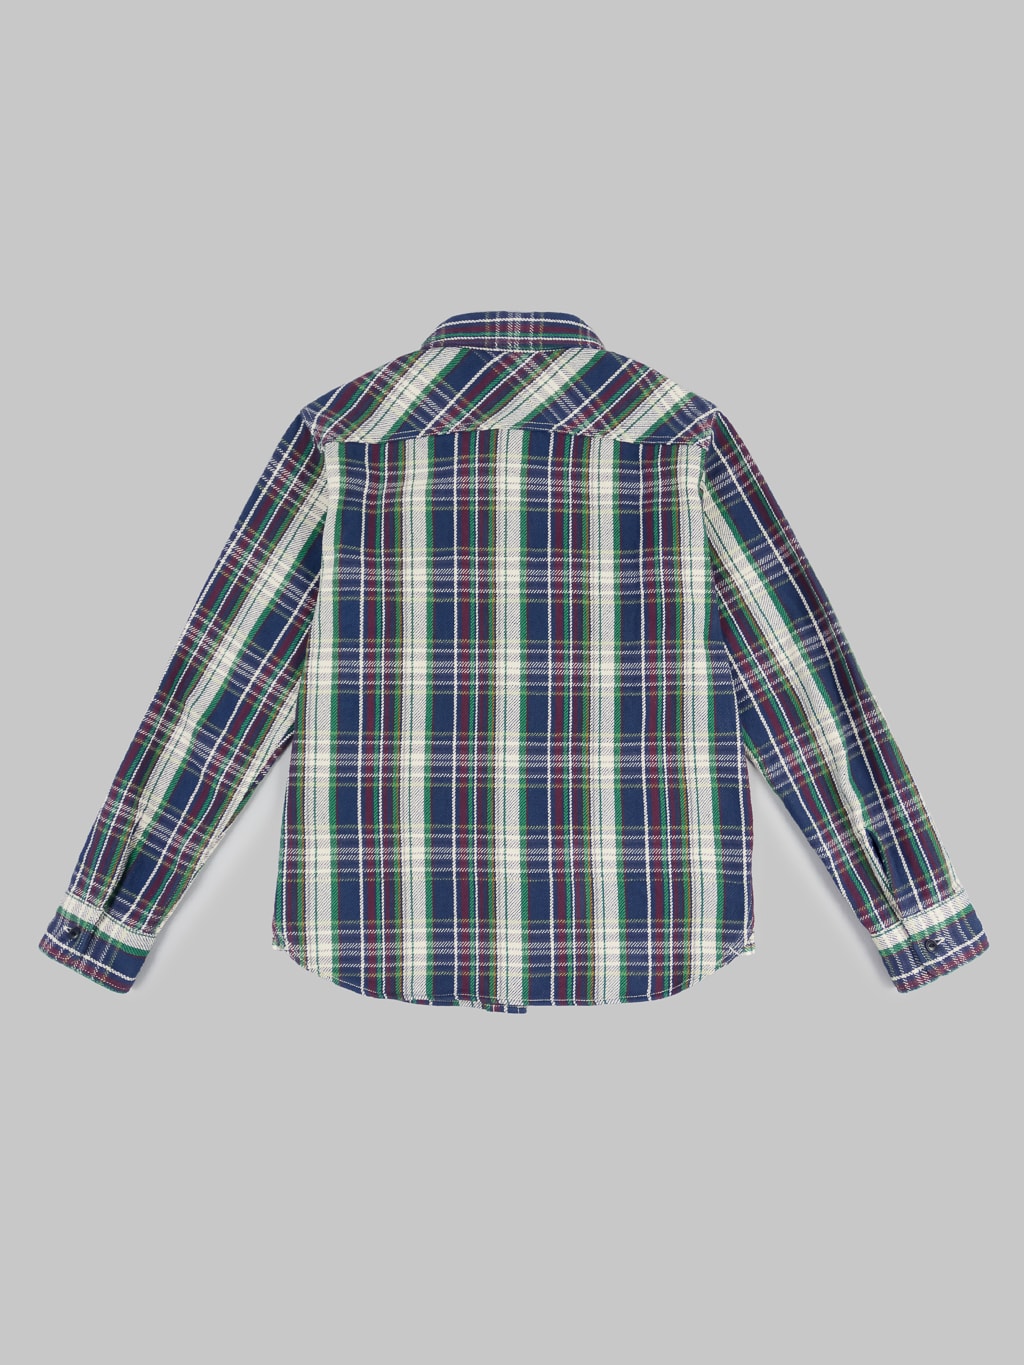 UES Heavy Flannel Shirt navy green back